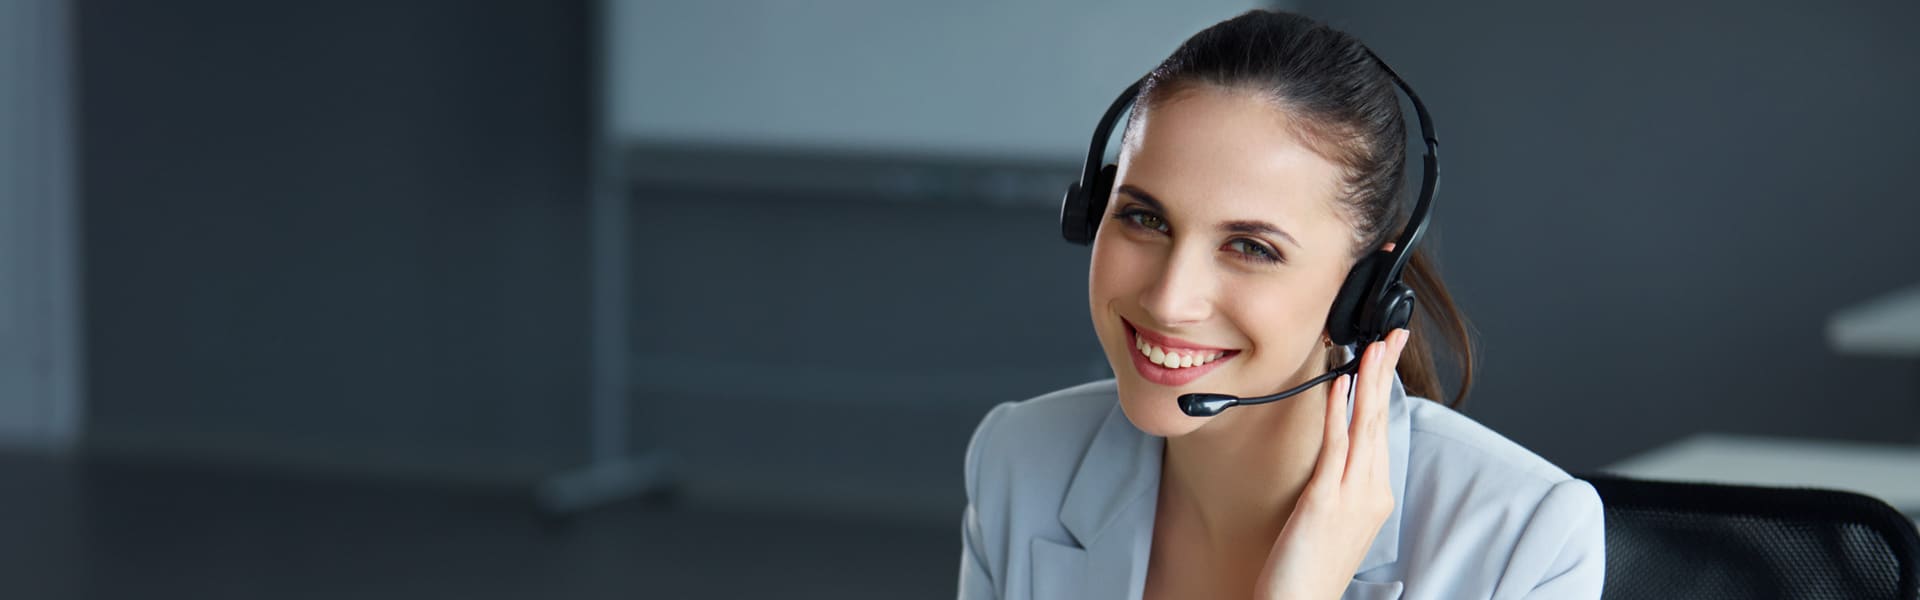 Call Center Telephone Answering Service - BIG Messages